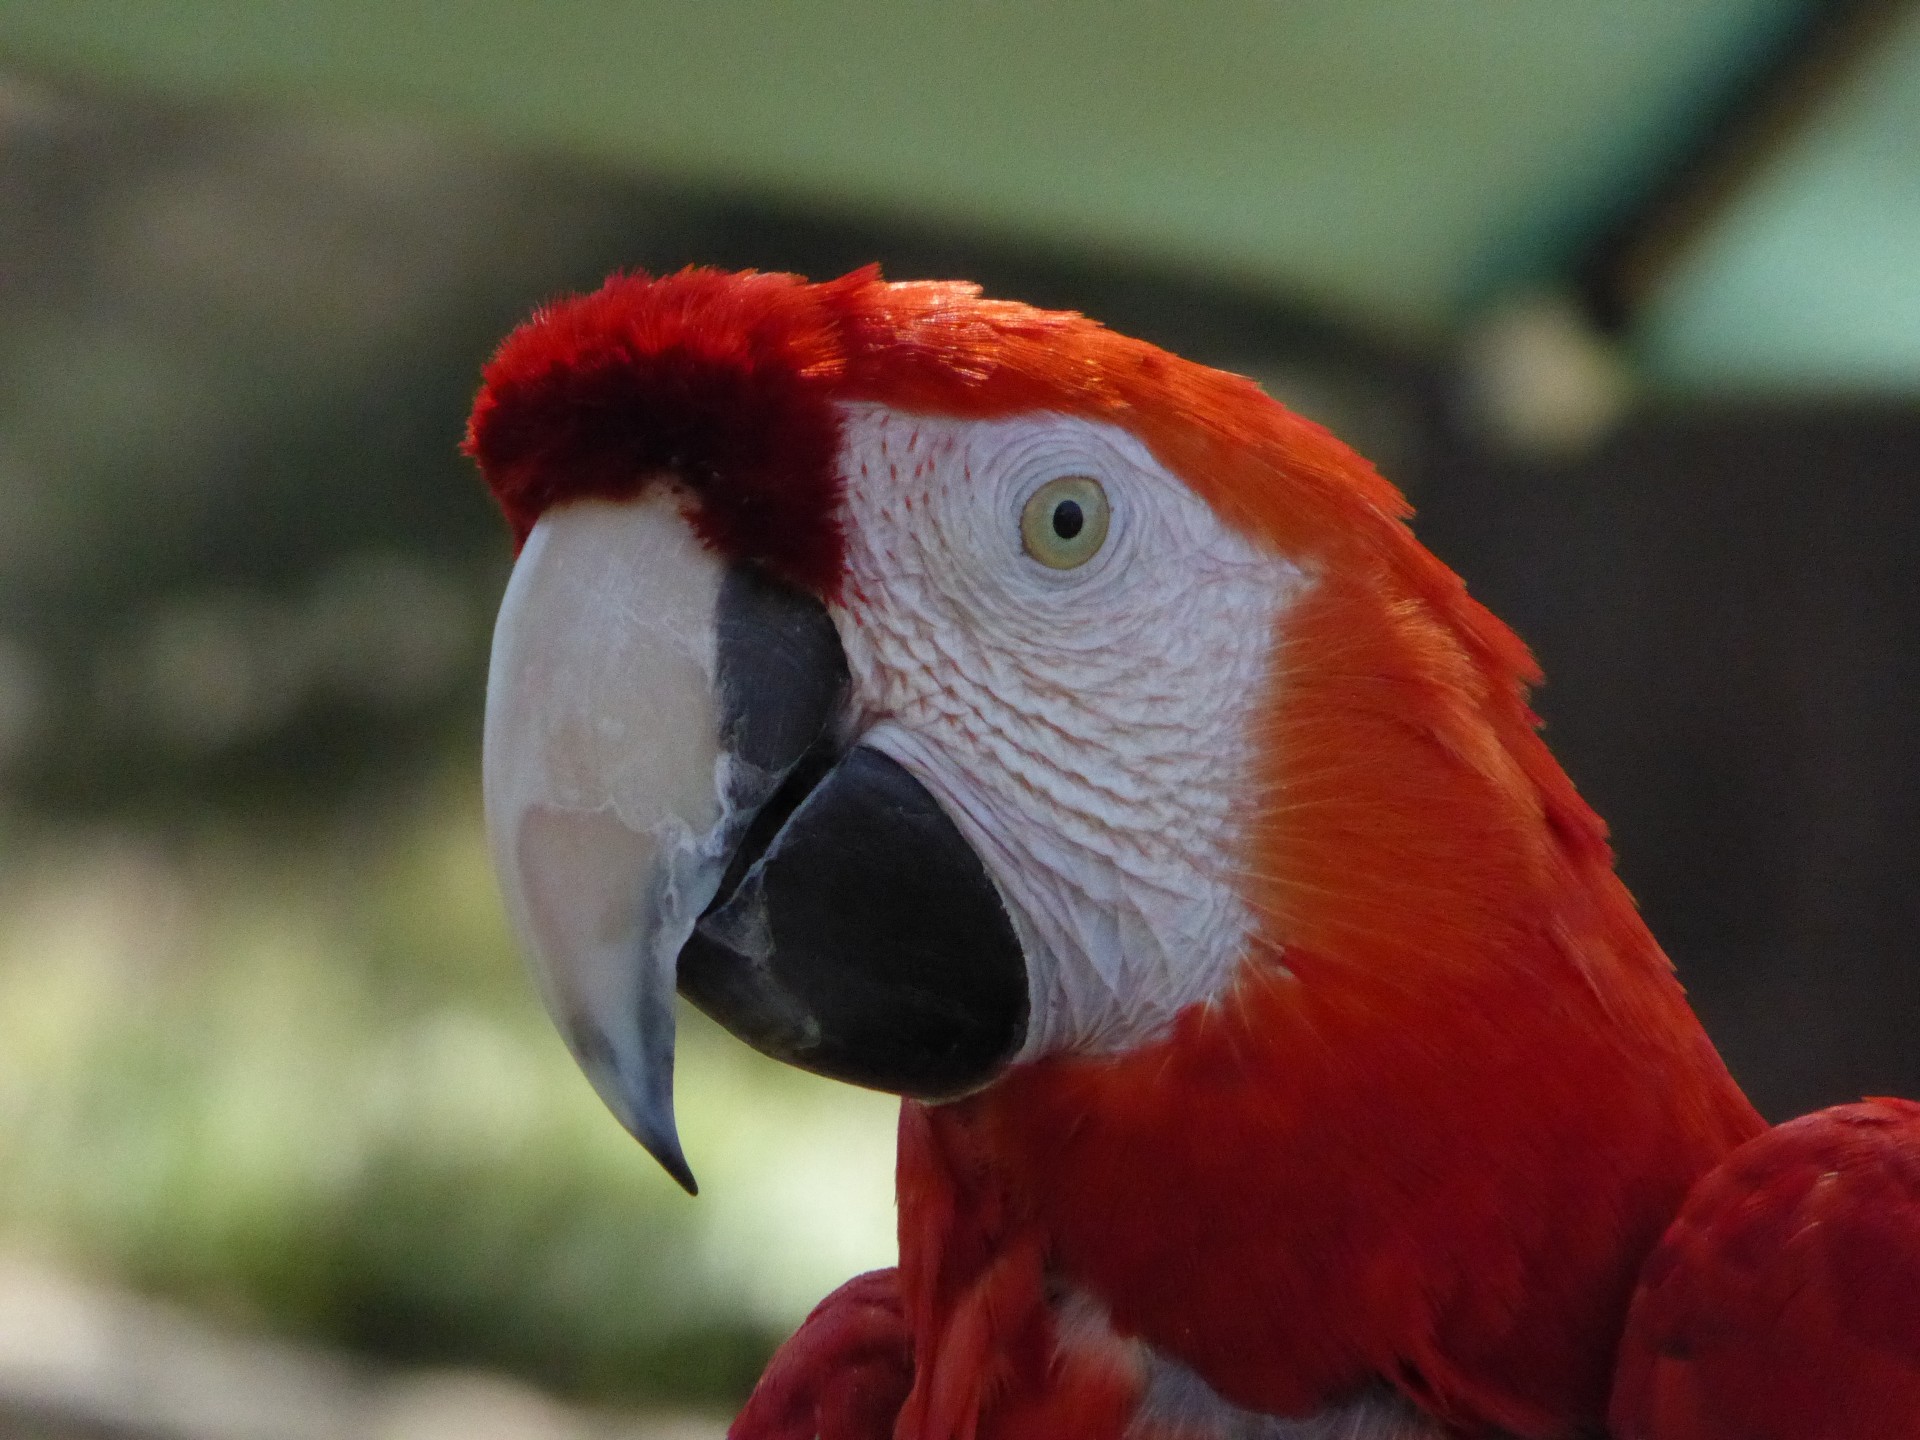 Red Macaw Parrot central